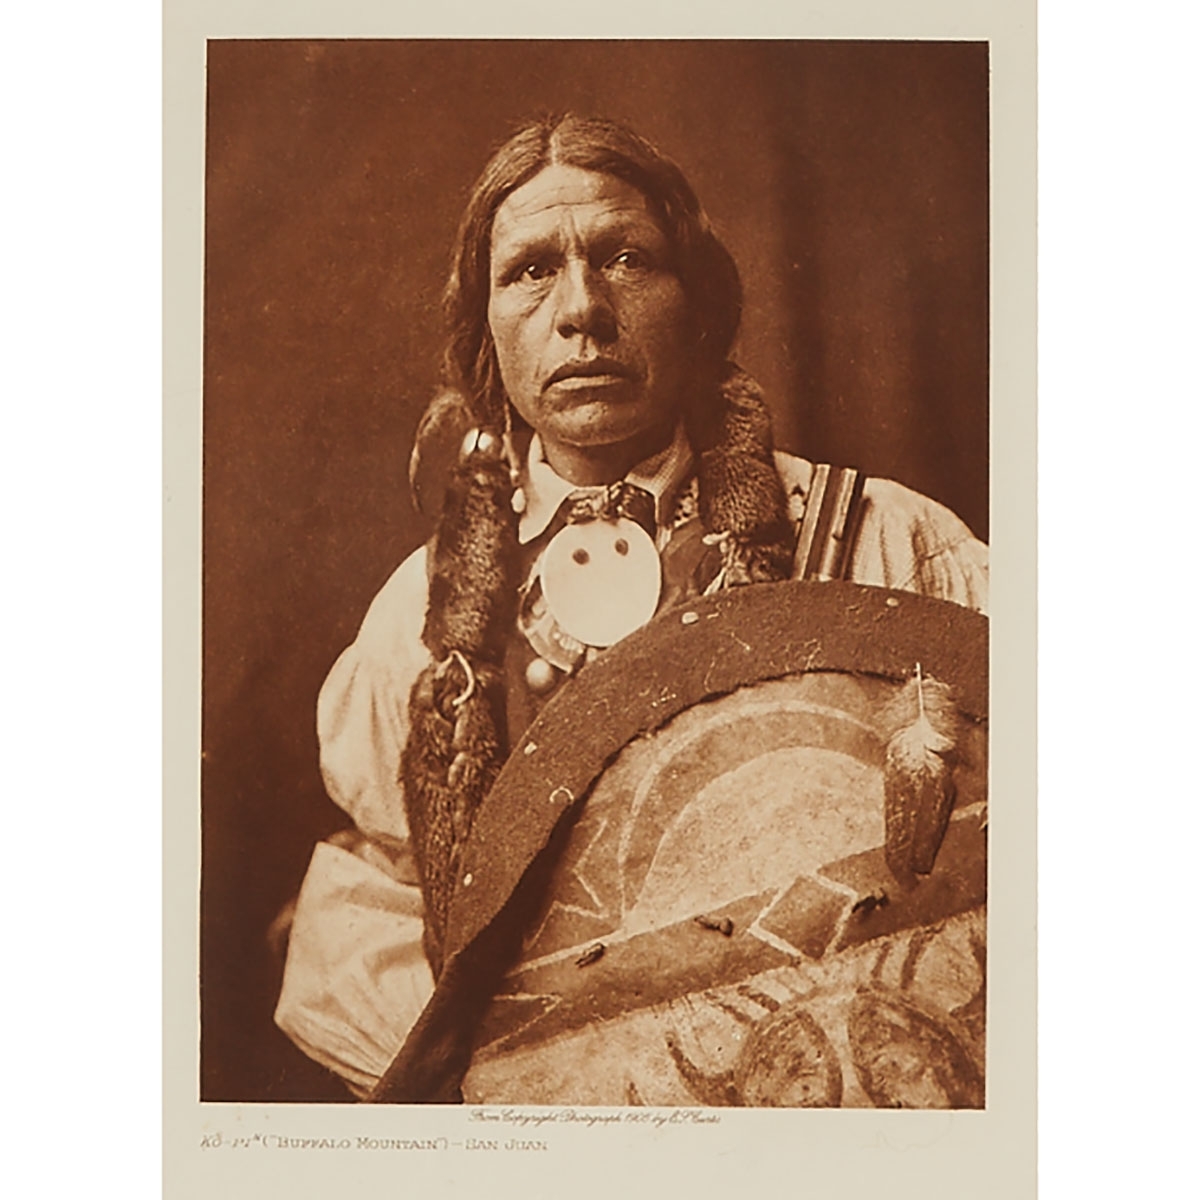 Artwork by Edward S. Curtis, 3 Works: SAN JUAN; NAKOAKTOK CHIEF AND COPPER;RUNNING FISHER - ATSINA, Made of Photogravures in sepia tone